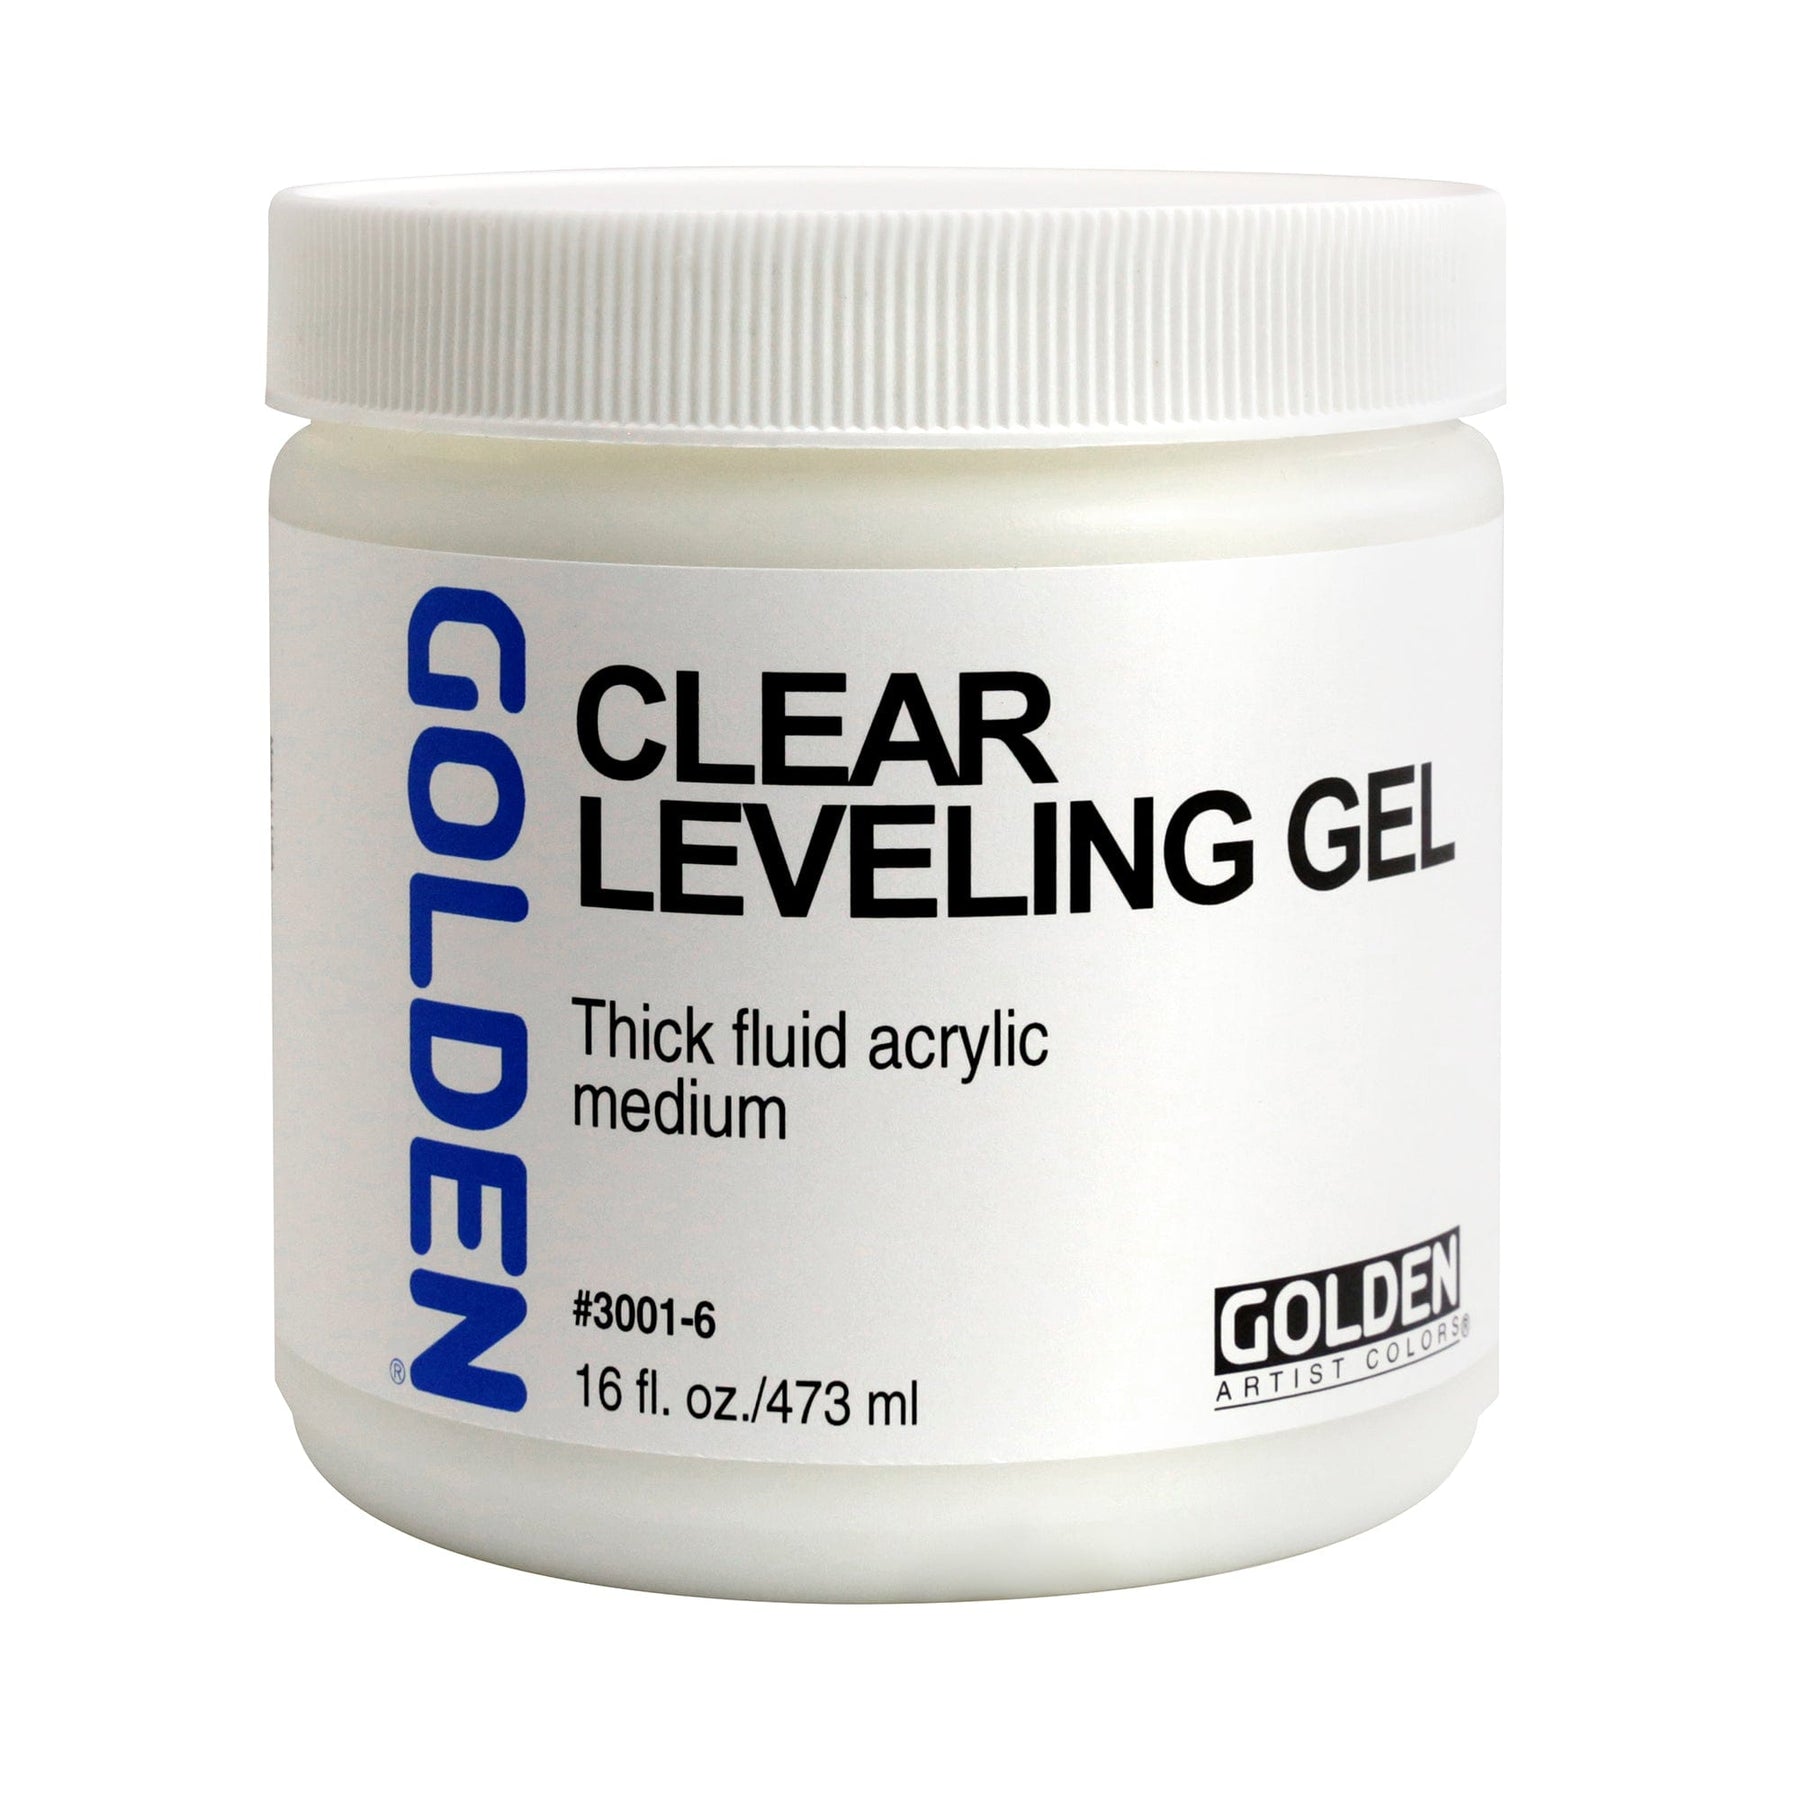 Clear Leveling Gels